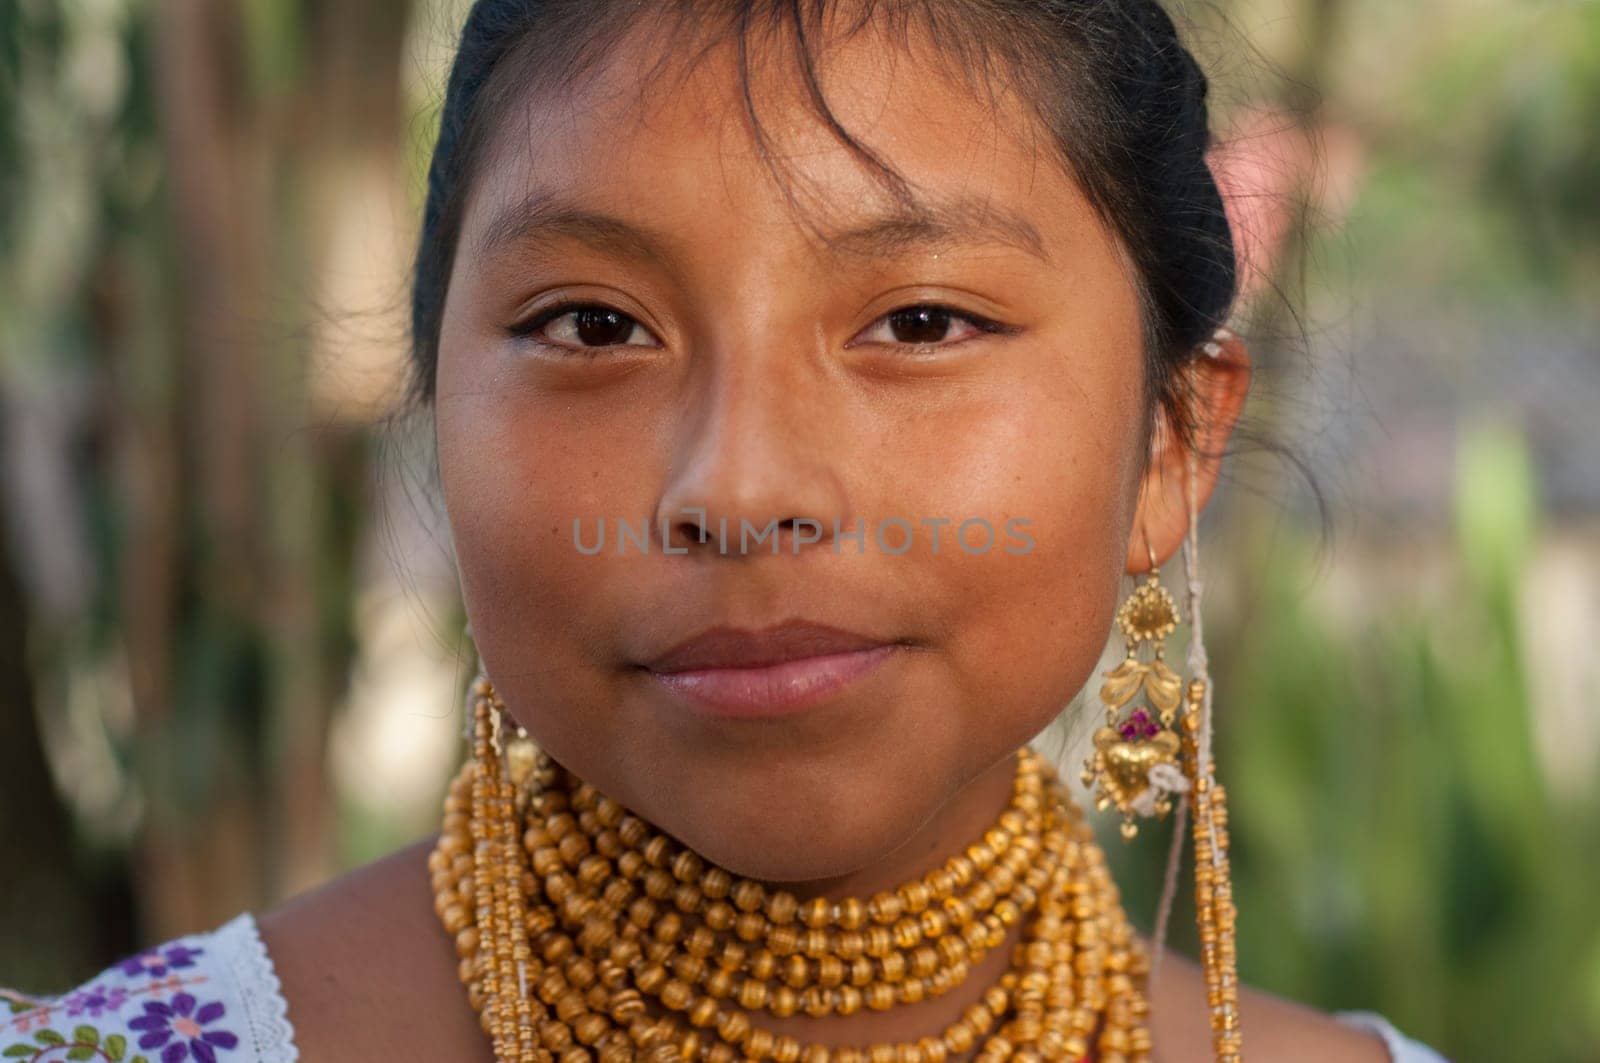 Cultural Heritage Revealed: An Expressive Gaze of Ethnic Diversity by Raulmartin